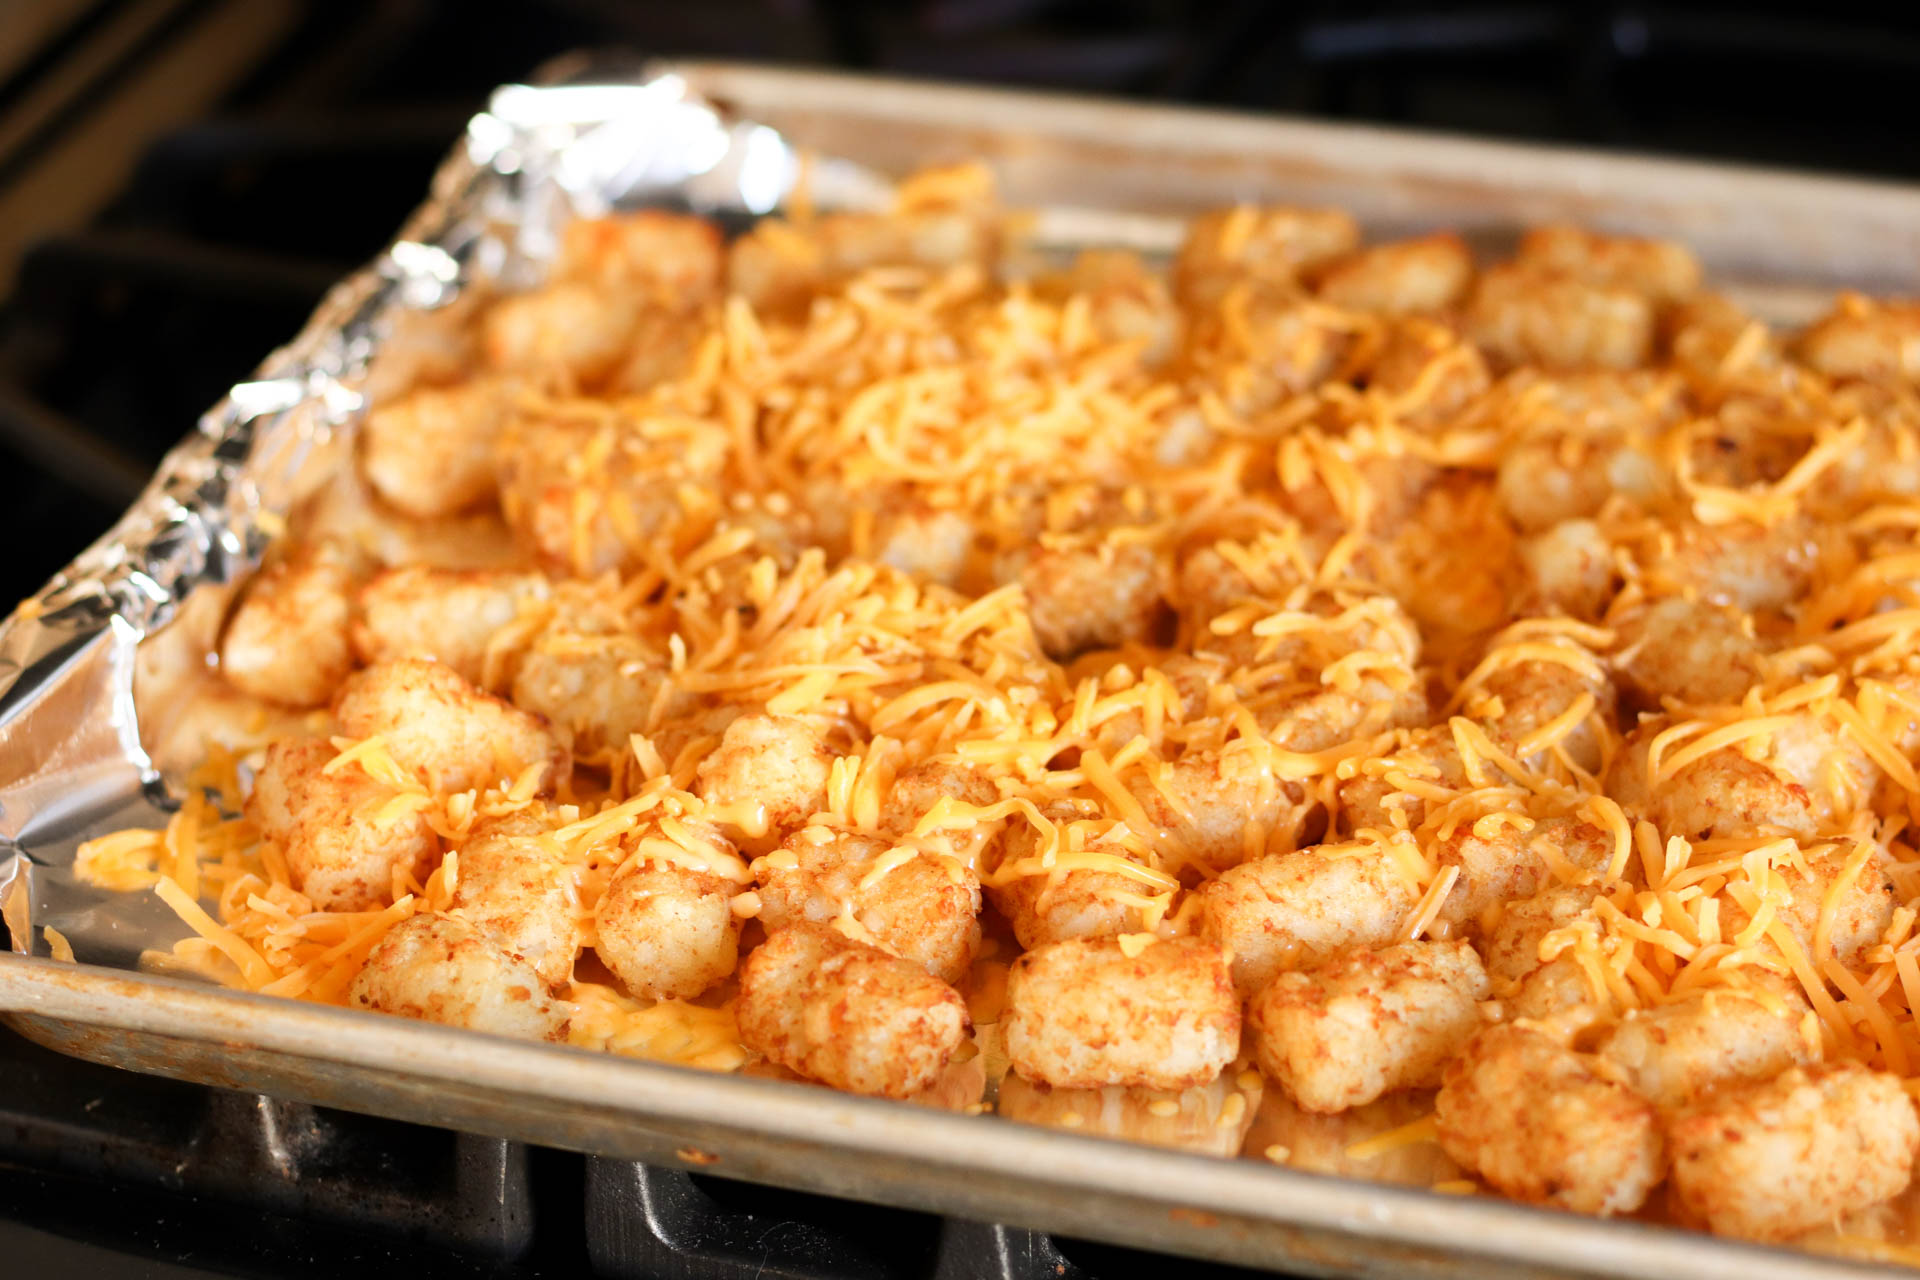 Tater tots on sheet pan covered with shredded cheese